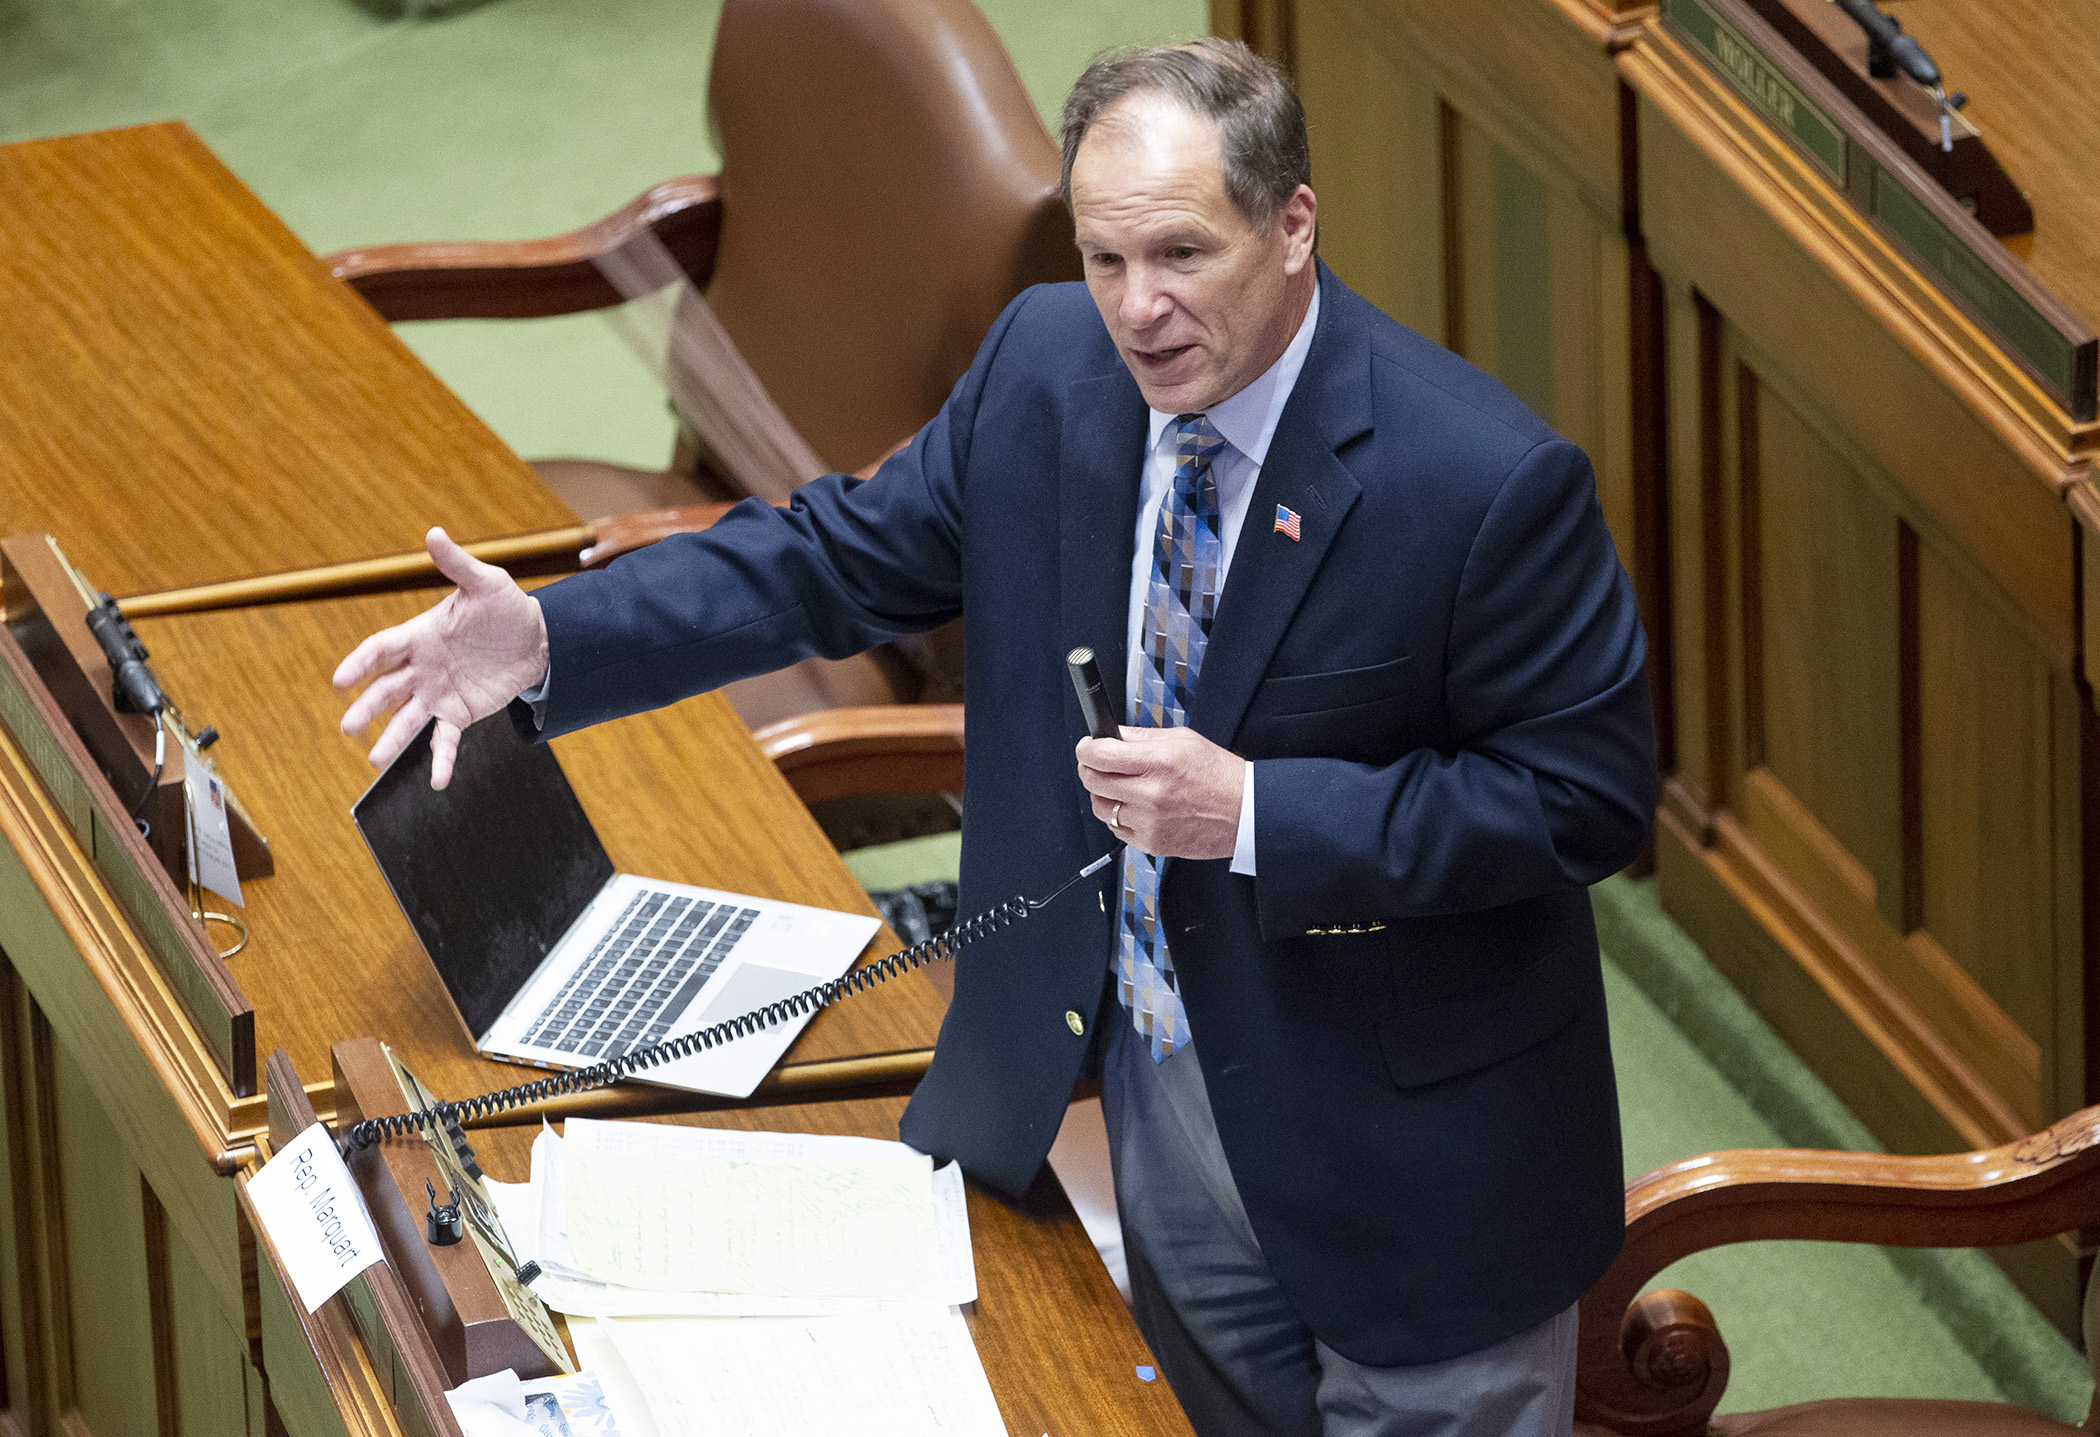 Rep. Paul Marquart makes closing comments on his bill, SSSF47, which would, in part, provide federal funds to counties, cities, and towns for expenses related to COVID-19, during floor debate June 19. Photo by Paul Battaglia